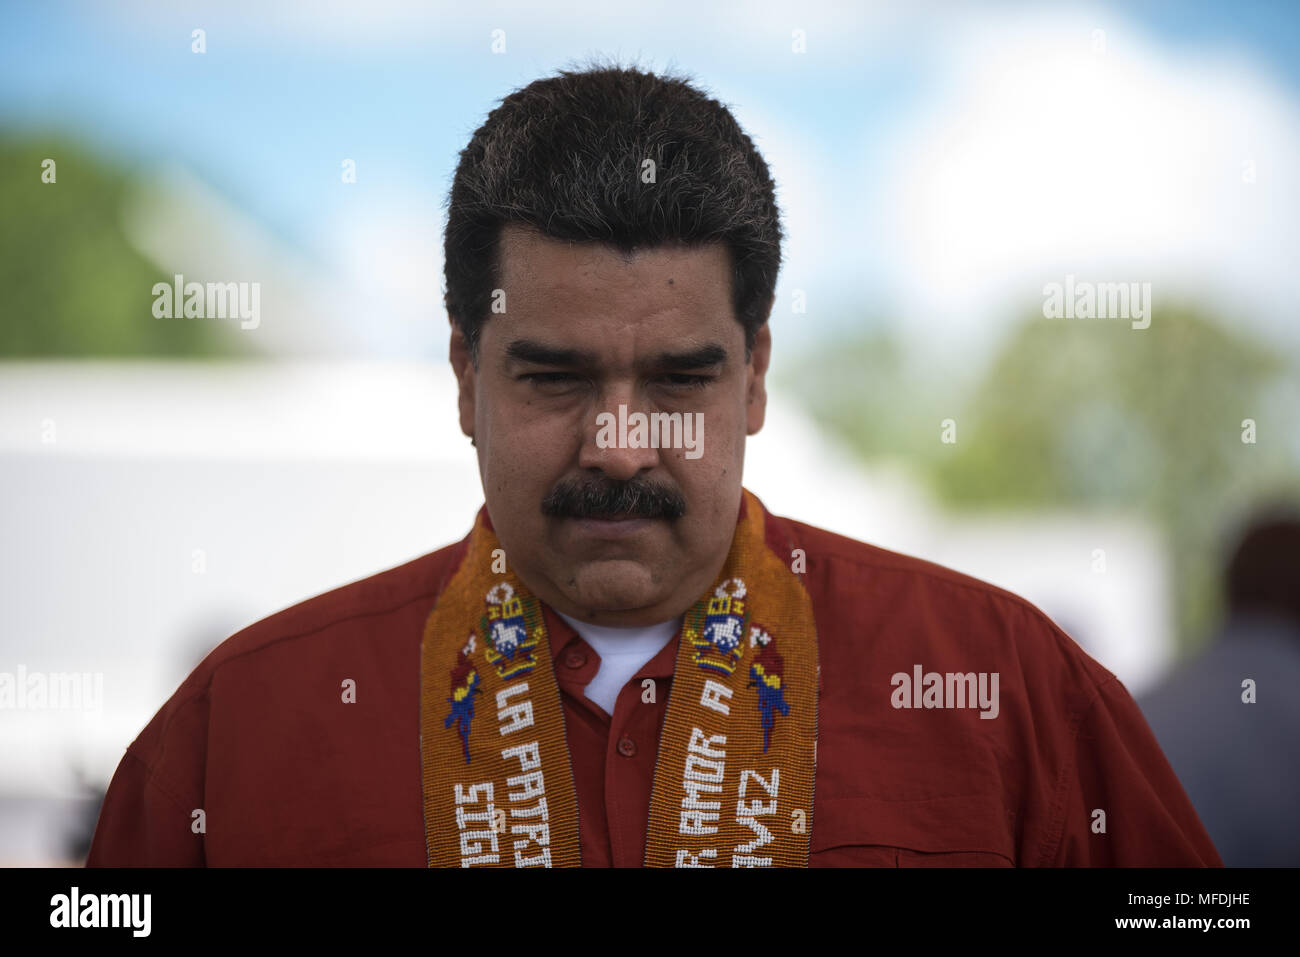 Venezuela, Tucupita, 24th april 2018. The president of Venezuela, Nicolás Maduro speaks at the airport in the city of Tucupita, capital of the state of Delta Amacuro (east), where he arrived to participate in a campaign event. Marcos Salgado / Alamy News Stock Photo